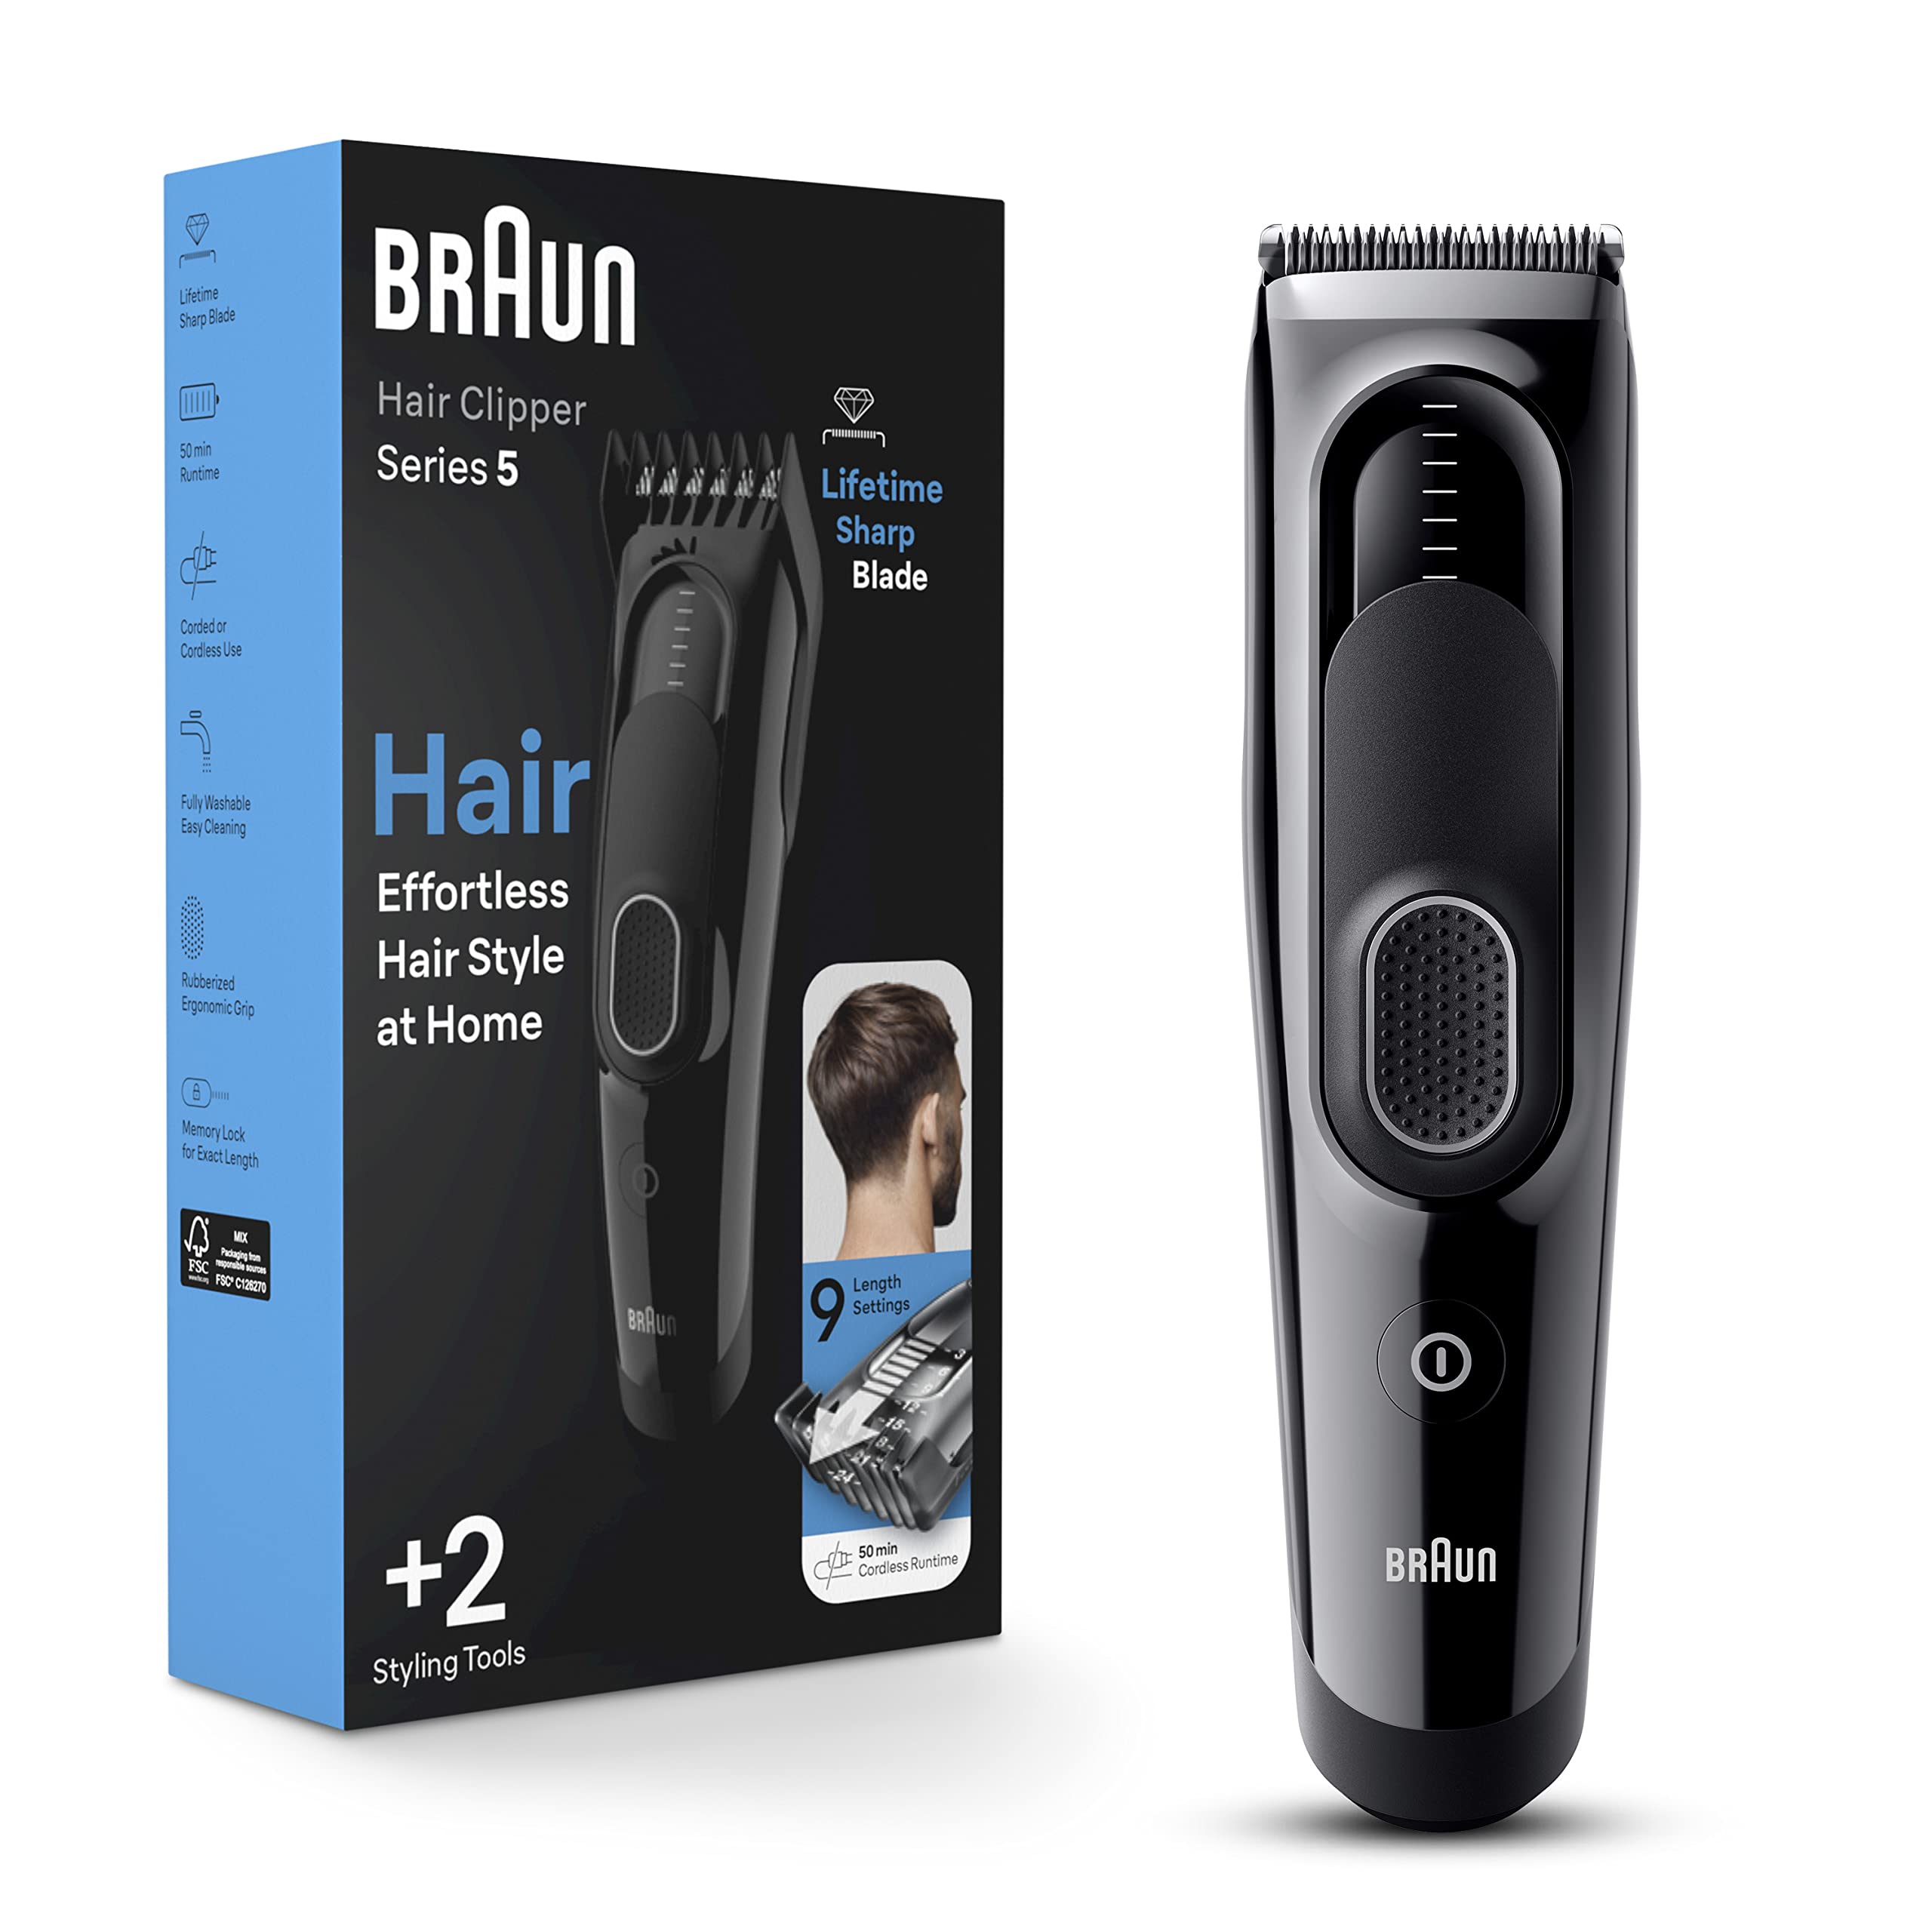 Braun Hair Clippers Series 5 5310, Hair Clippers for Men, Hair Clip from Home with 9 Length Settings, Incl. Memory SafetyLock Recall Setting, Ultra-Sharp Blades, 2 Combs,